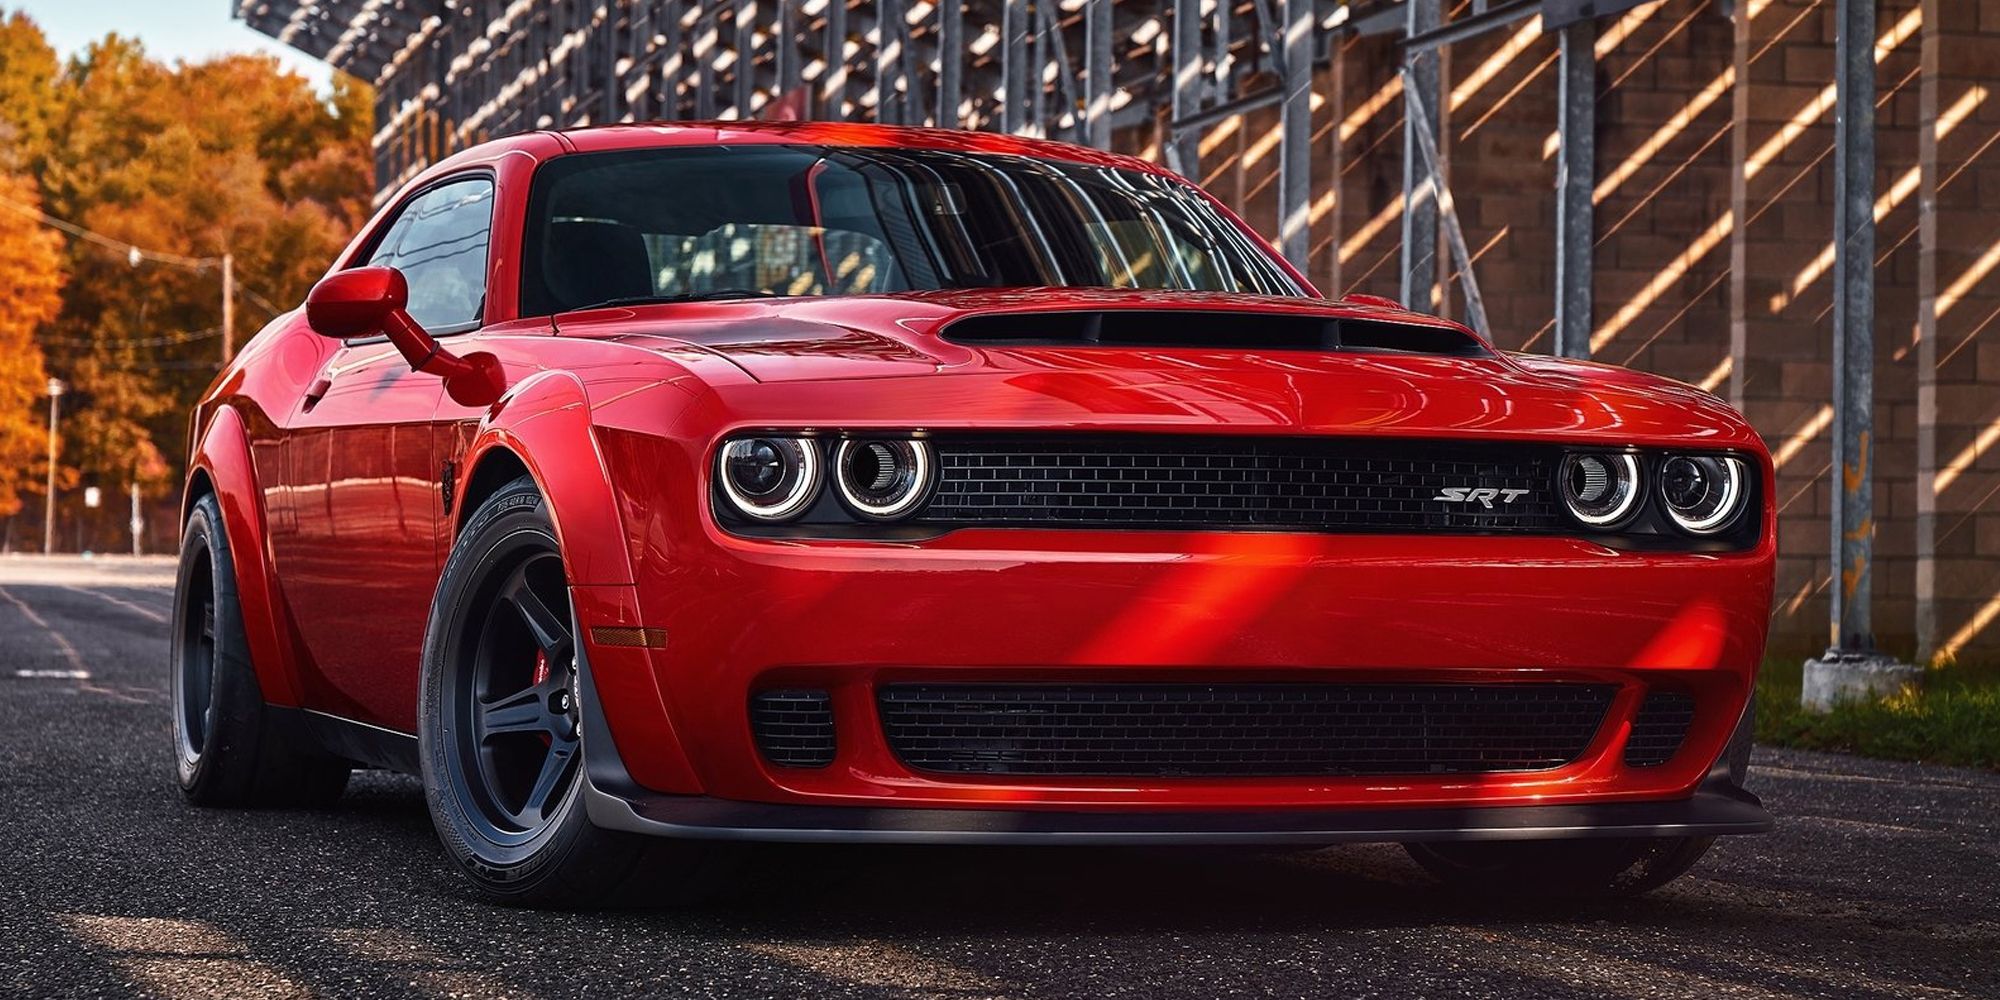 The front of a red Dodge Demon